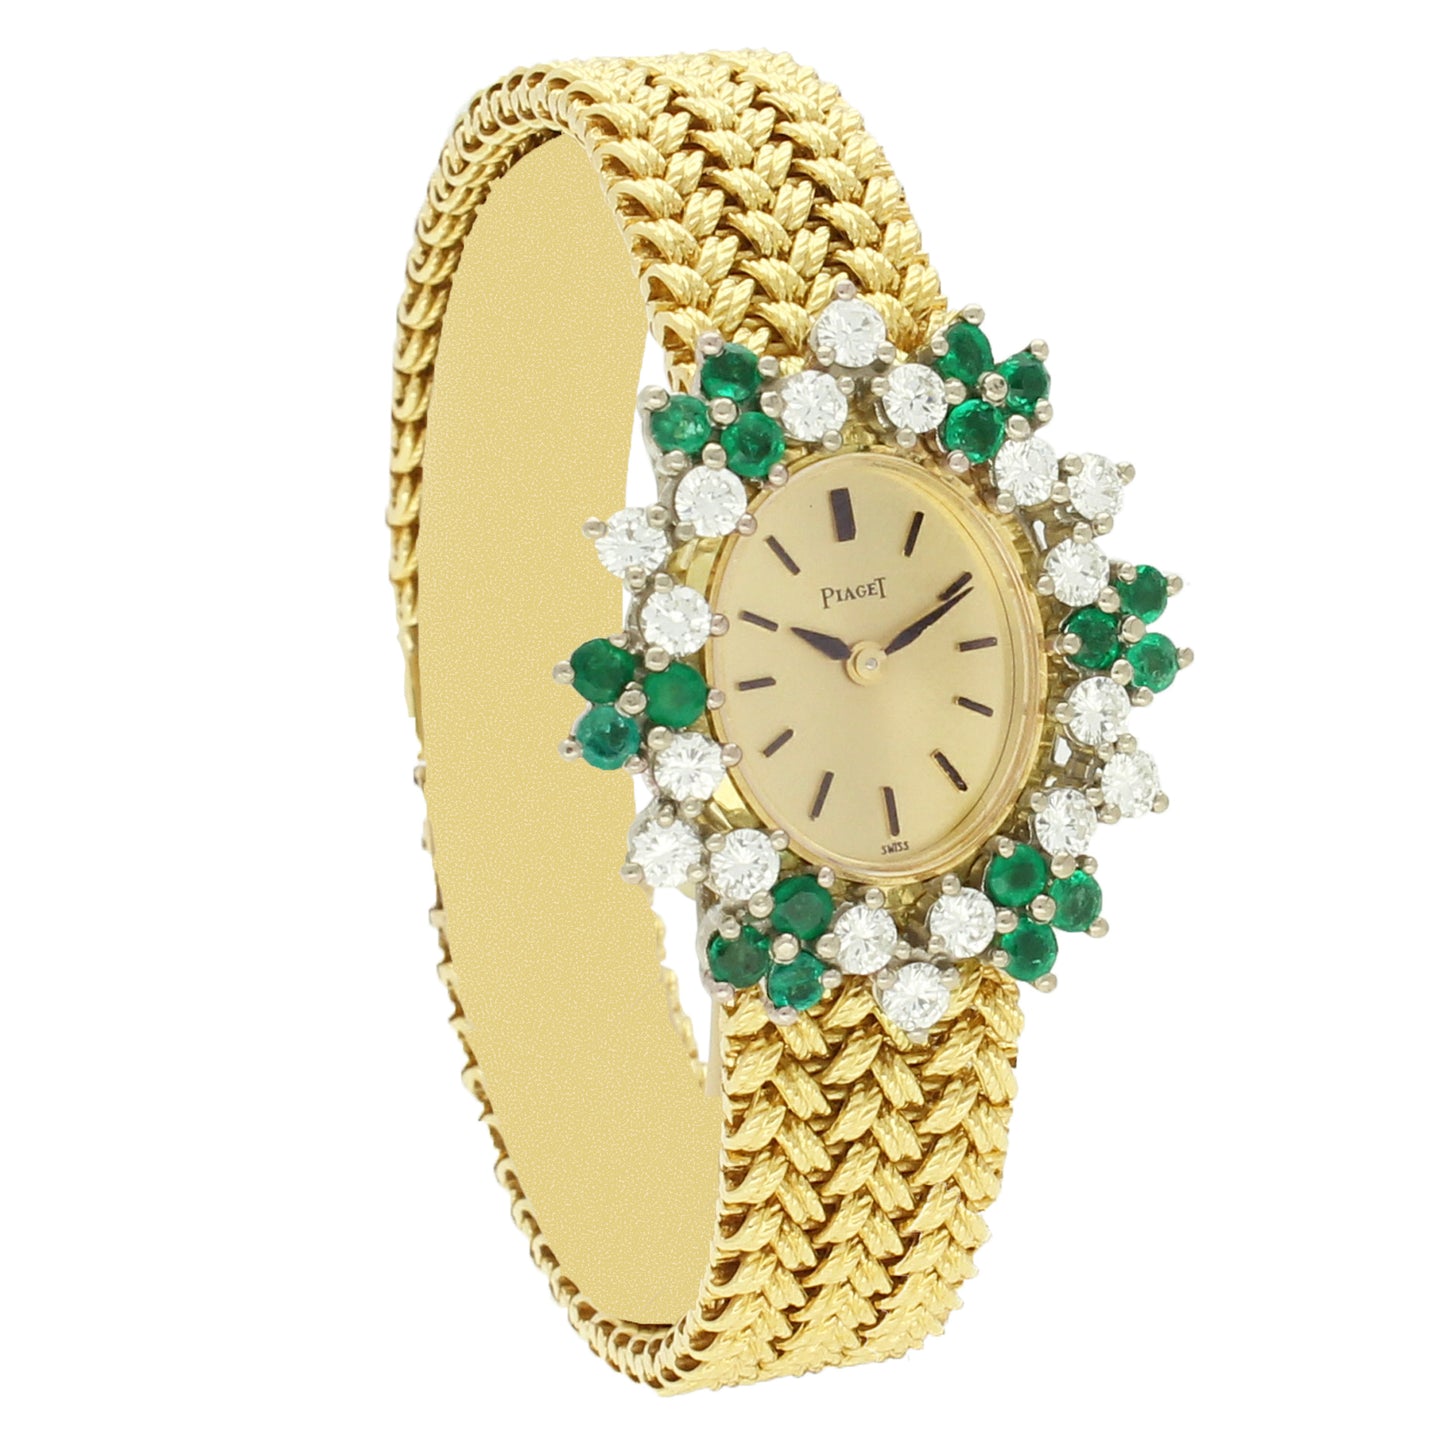 18ct yellow gold Piaget, reference 37712 bracelet watch with diamond and emerald set bezel. Made 1970's